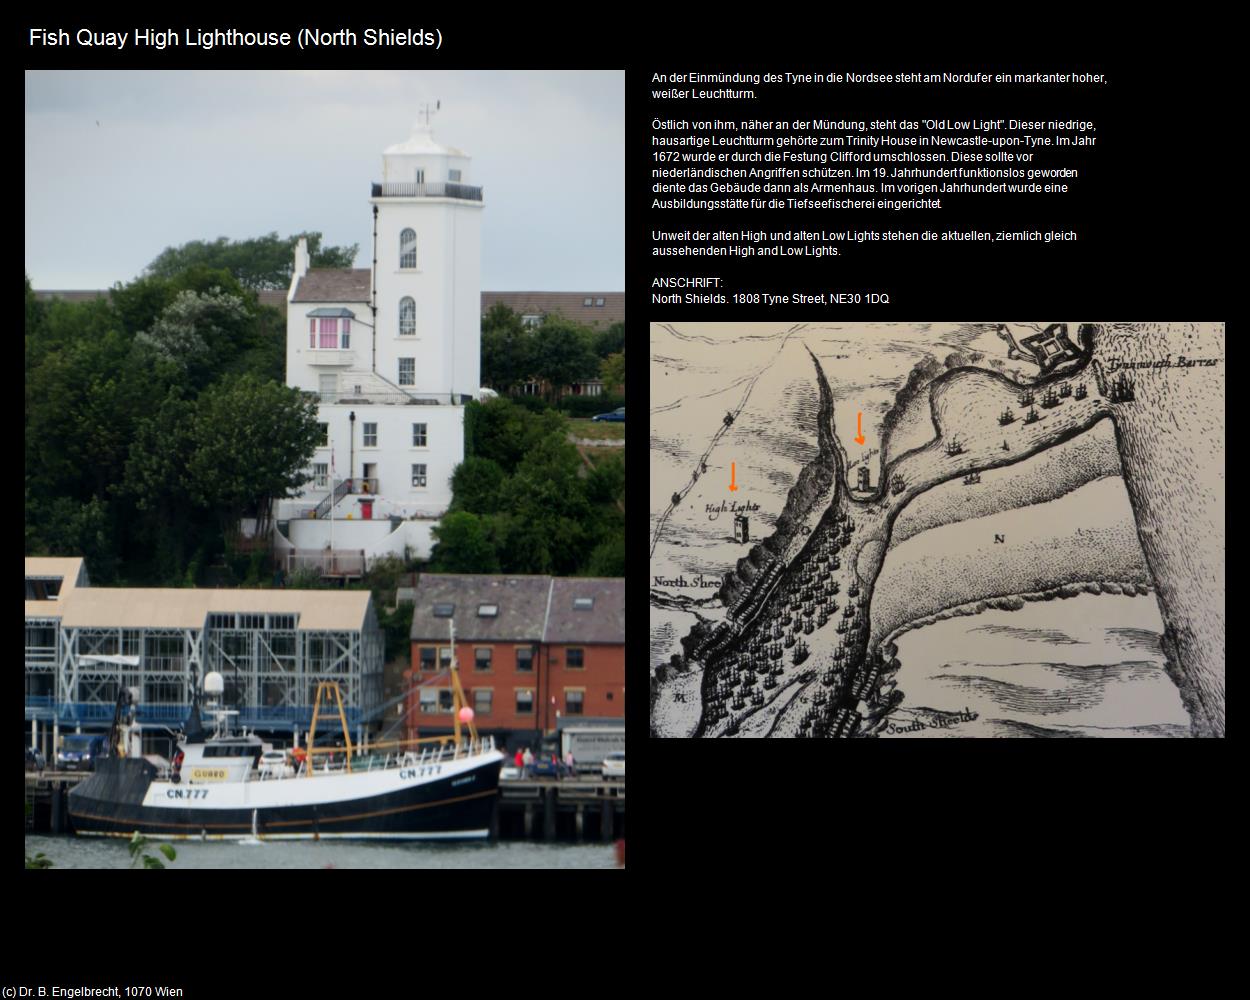 Fish Quay High Lighthouse (North Shields, England) in Kulturatlas-ENGLAND und WALES